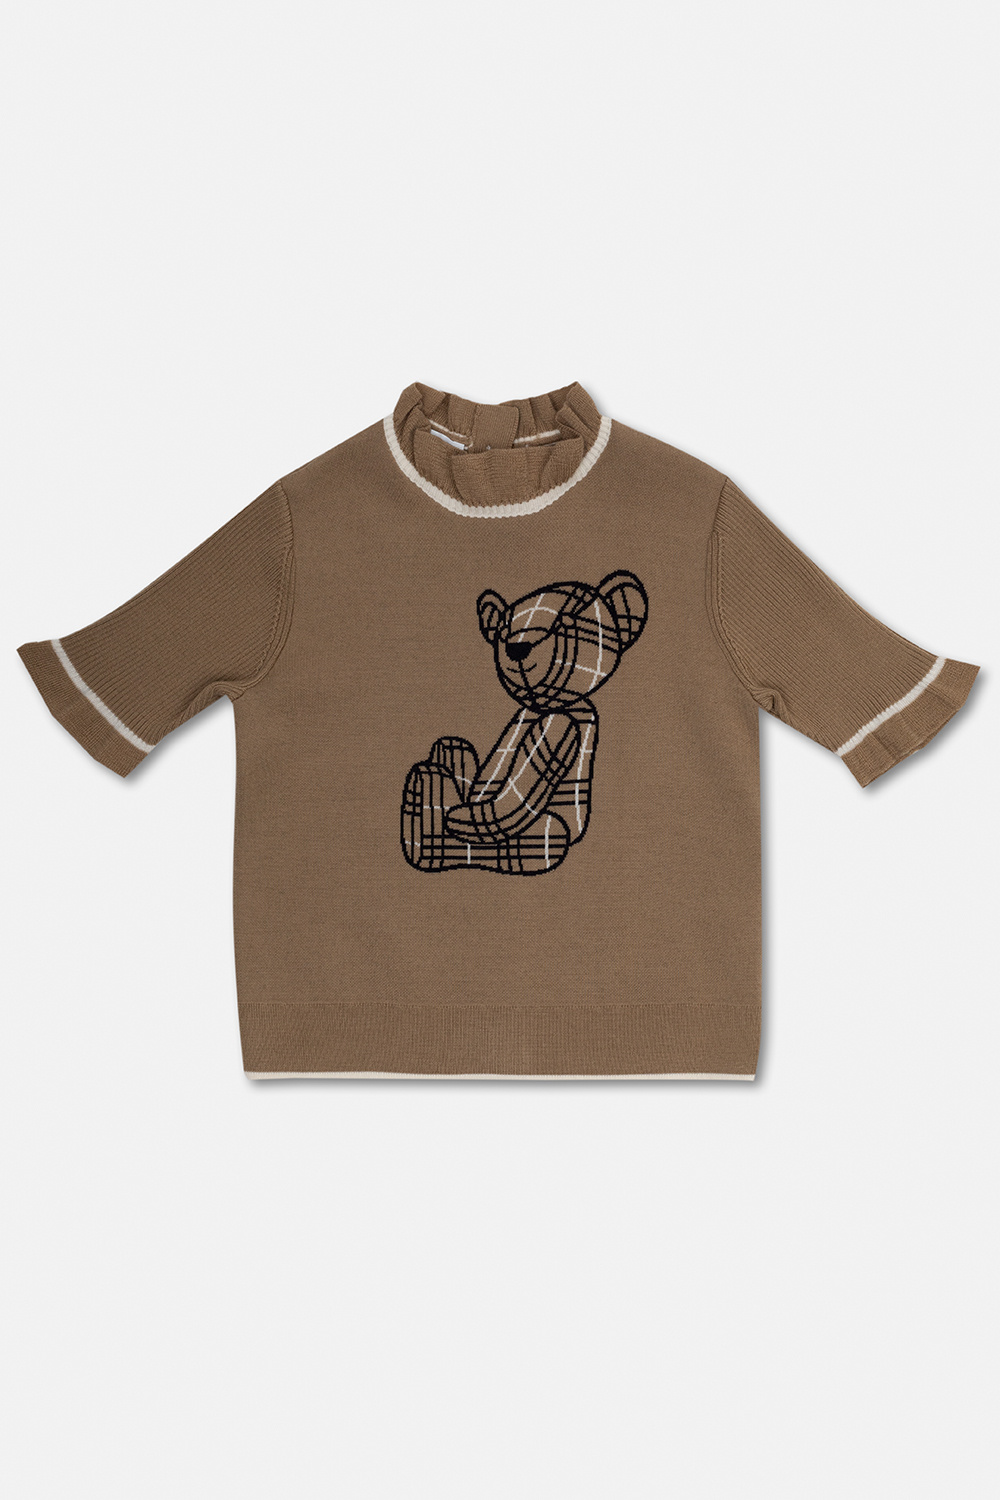 burberry Shape-memory Kids ‘Avrile’ sweater with decorative sleeves